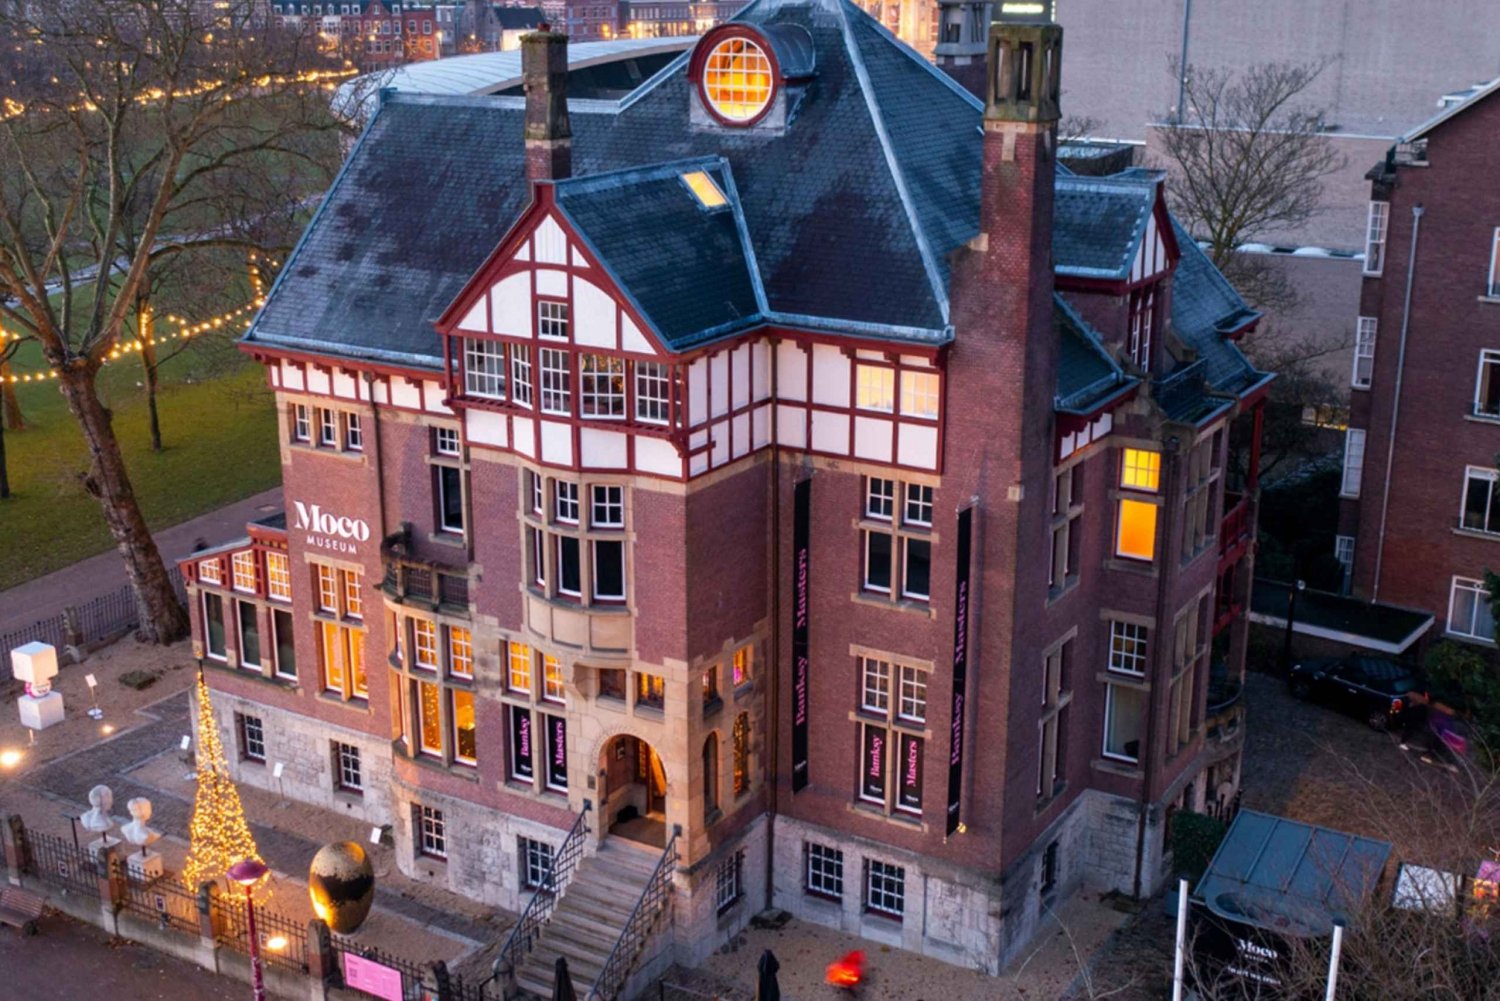 Amsterdam: Moco Museum & Nightclubs Admission Combo w/ Taxi: Moco Museum & Nightclubs Admission Combo w/ Taxi